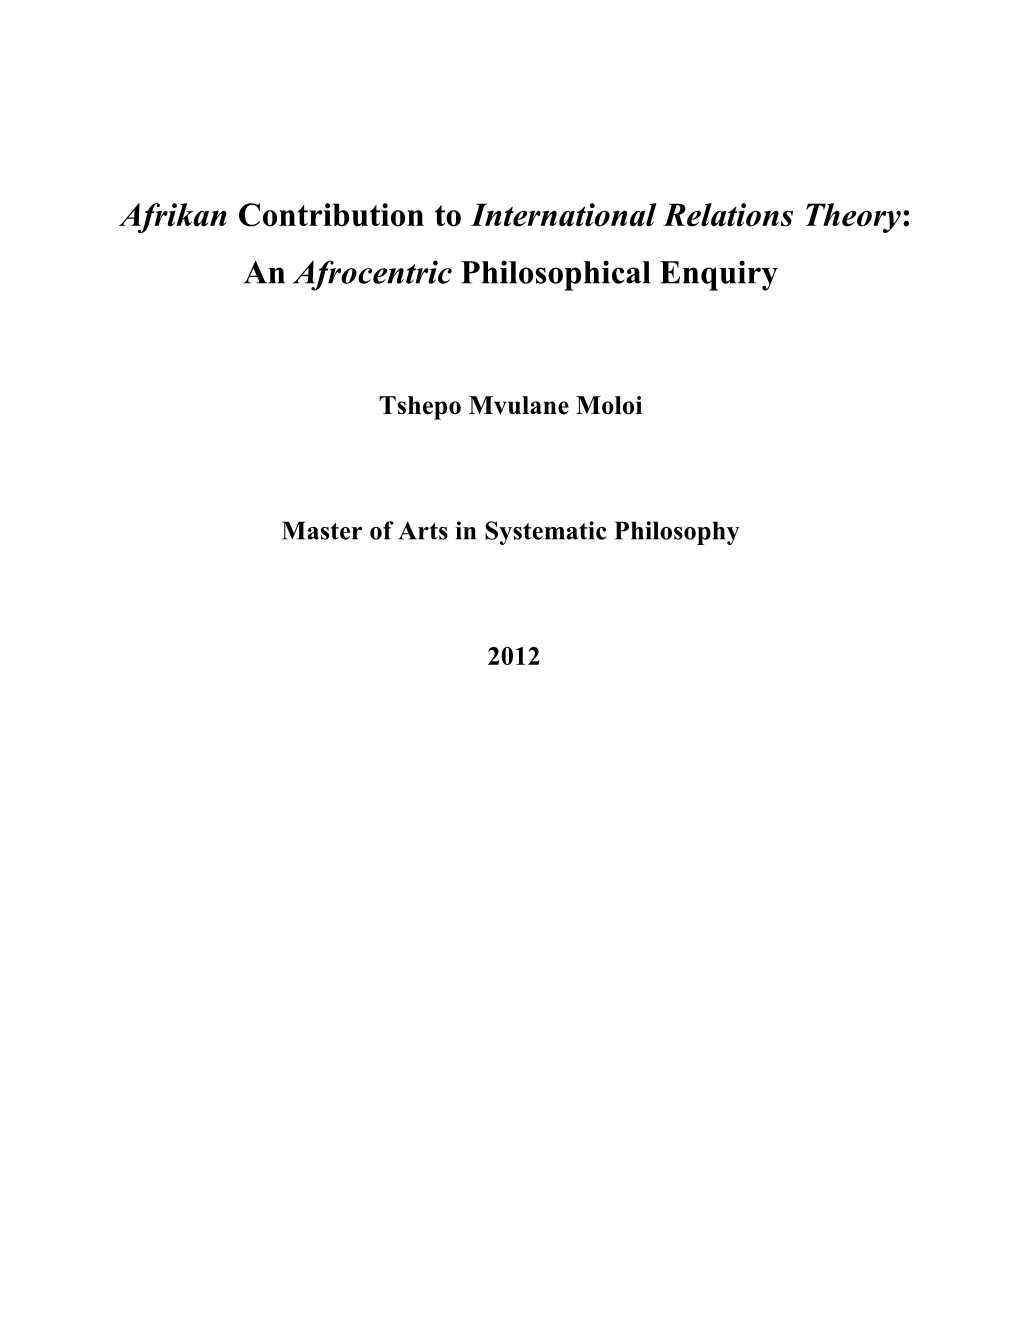 Afrikan Contribution to International Relations Theory: an Afrocentric Philosophical Enquiry